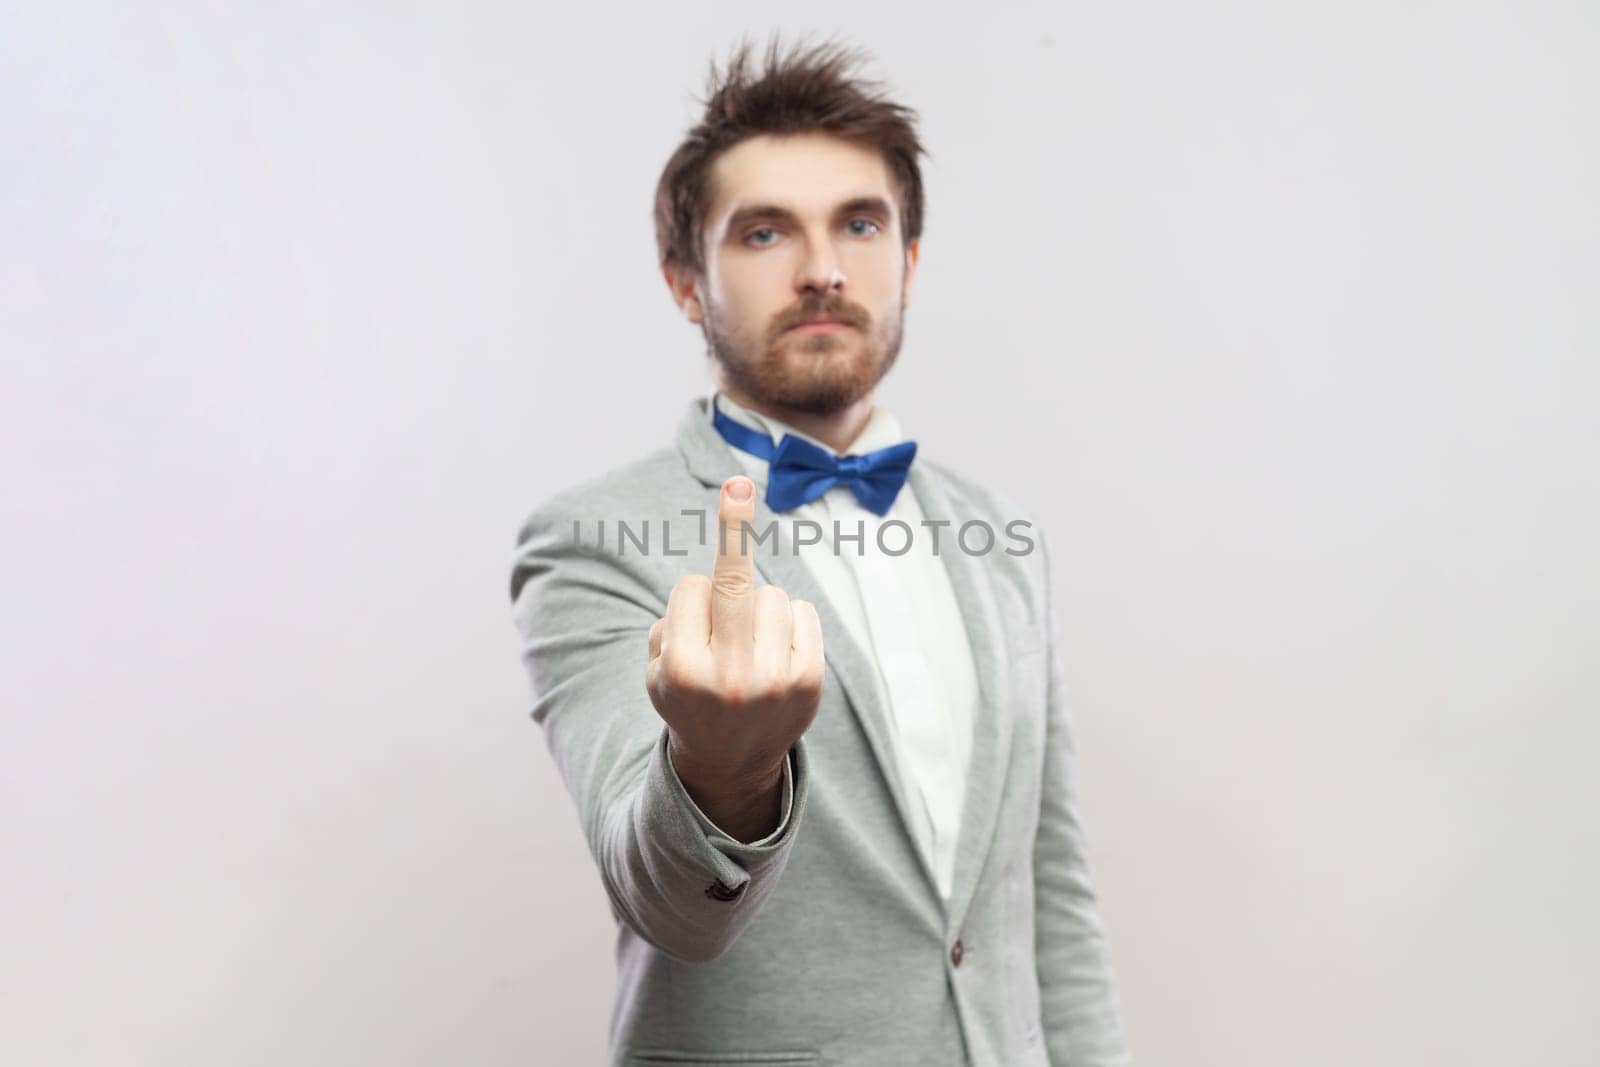 Portrait of rude impolite handsome bearded man standing showing middle finger, arguing with somebody, wearing grey suit and blue bow tie. Indoor studio shot isolated on gray background.